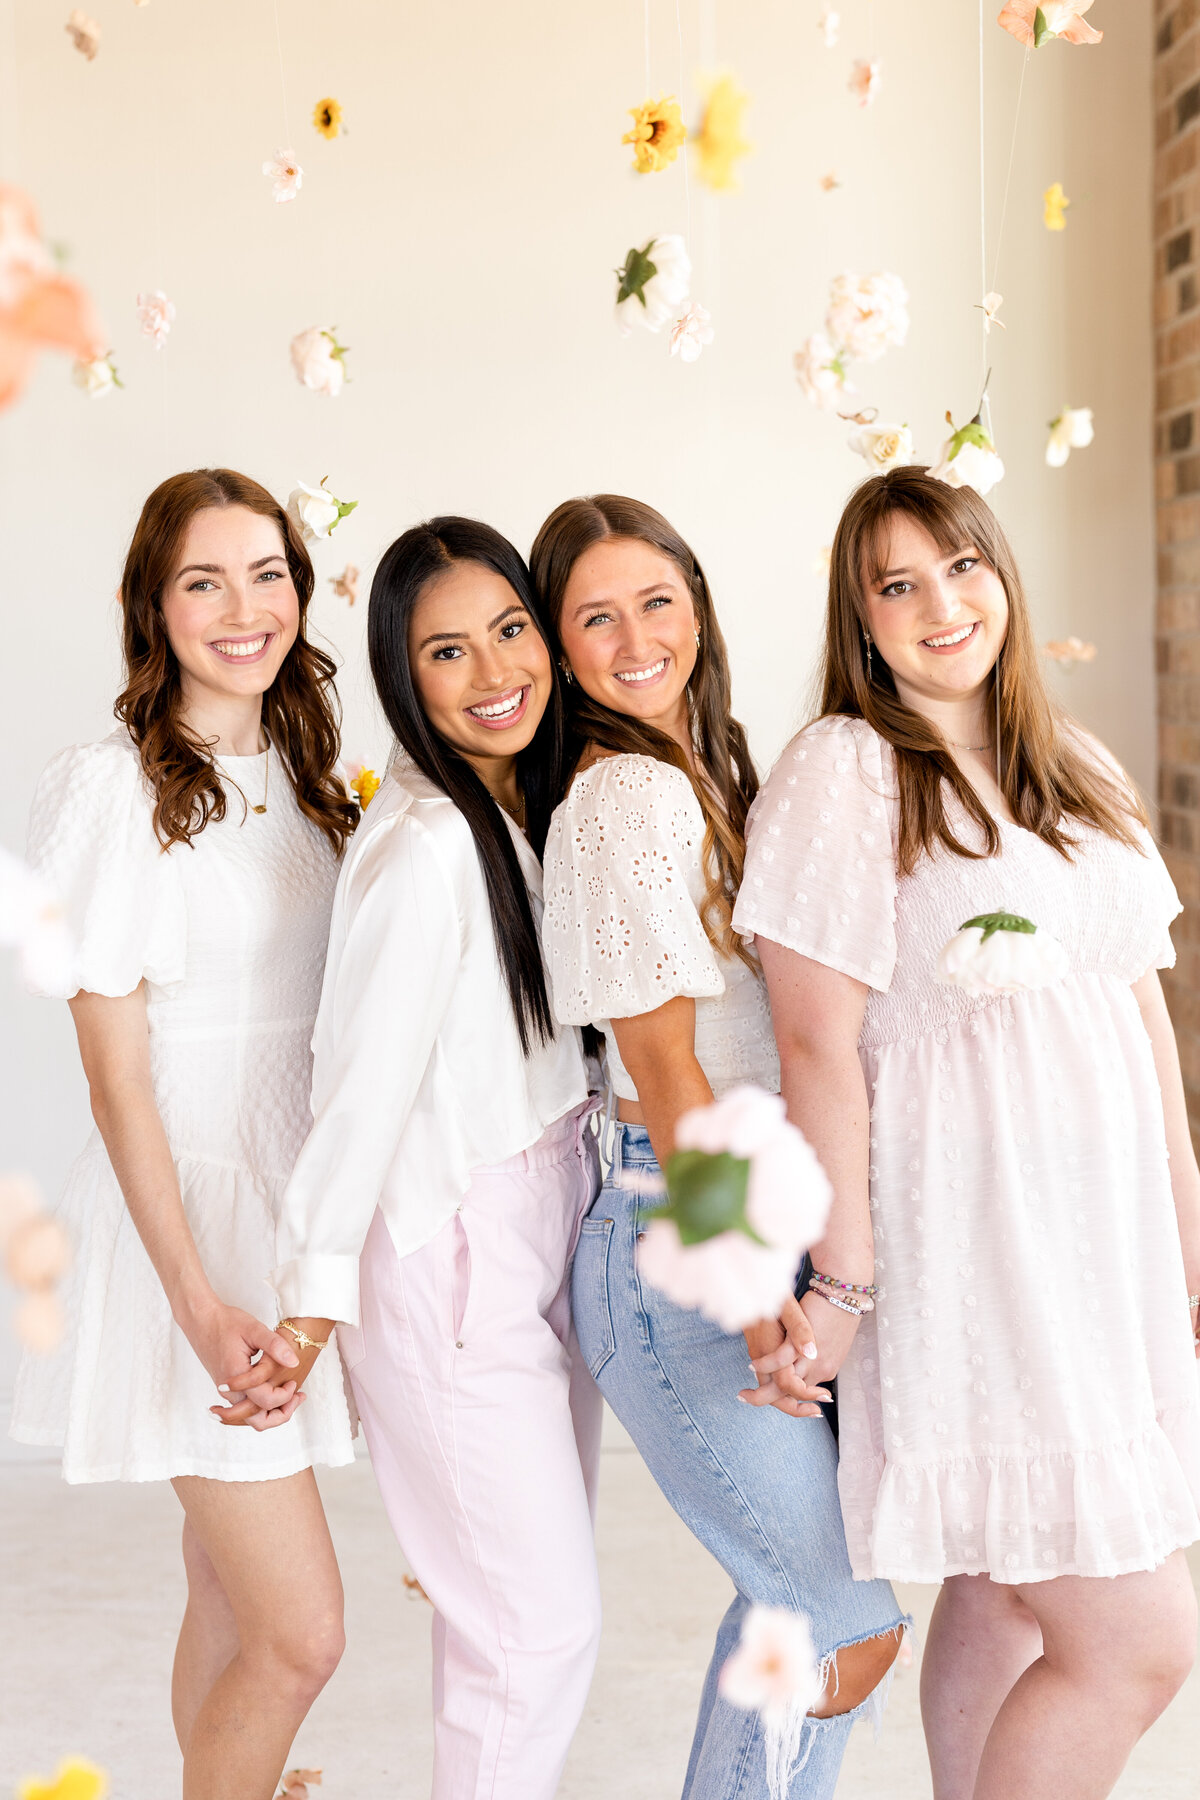 Senior girls holding hands and smiling in the middle of a hanging garden of flowers at Bravely Studio in Downtown Houston